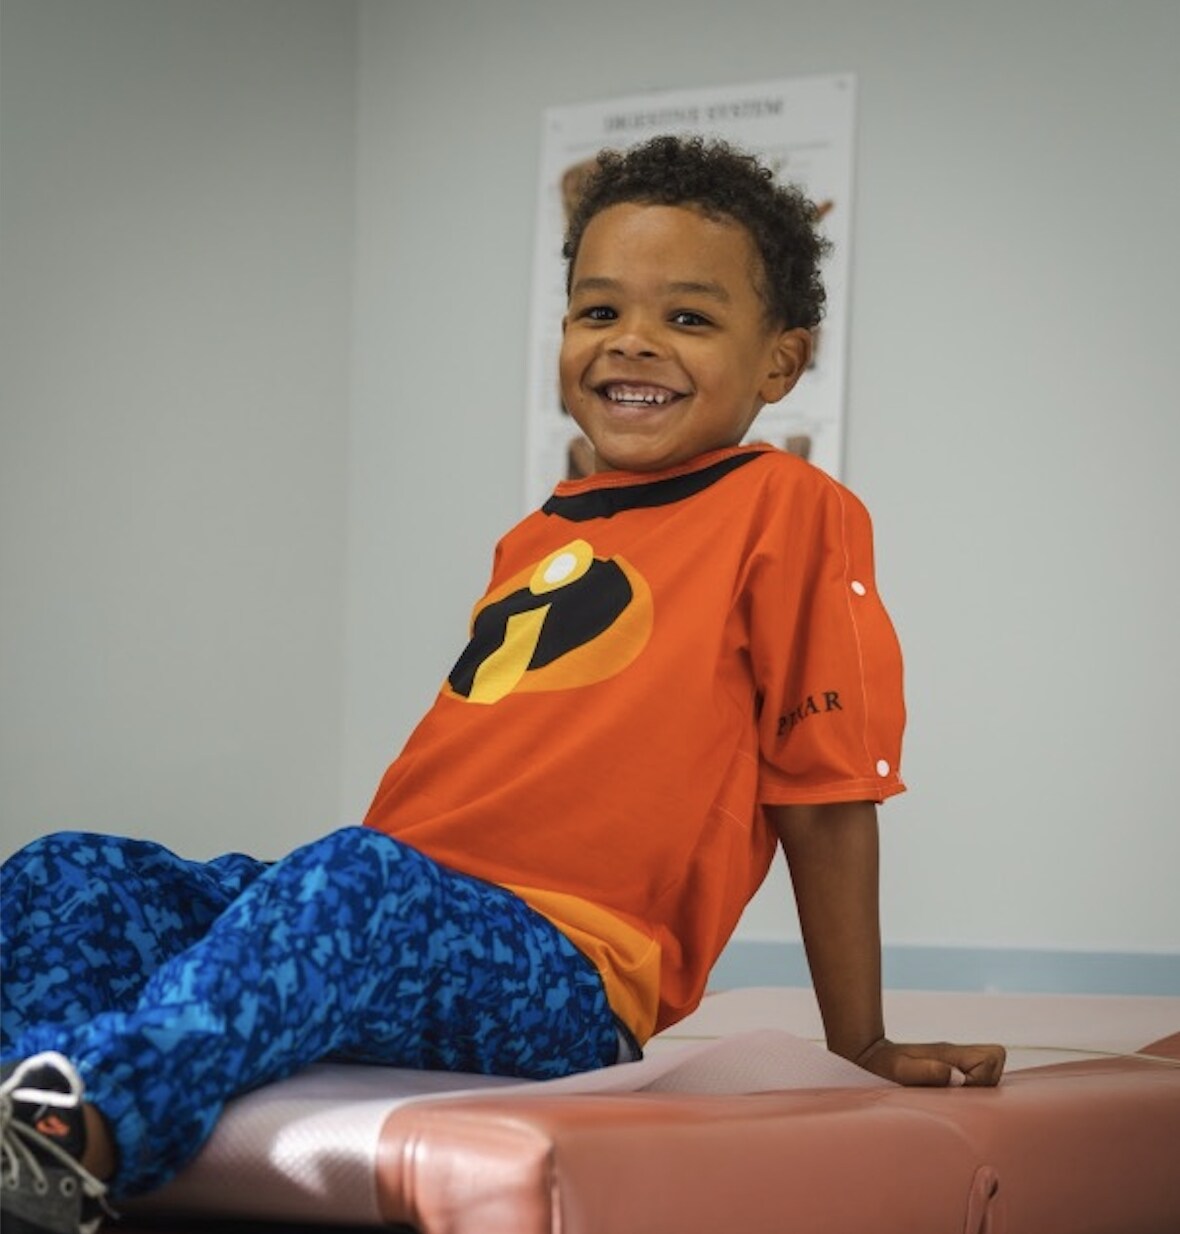 A boy smiles in his "Incredibles"-inspired Pixar-Starlight hospital gown.